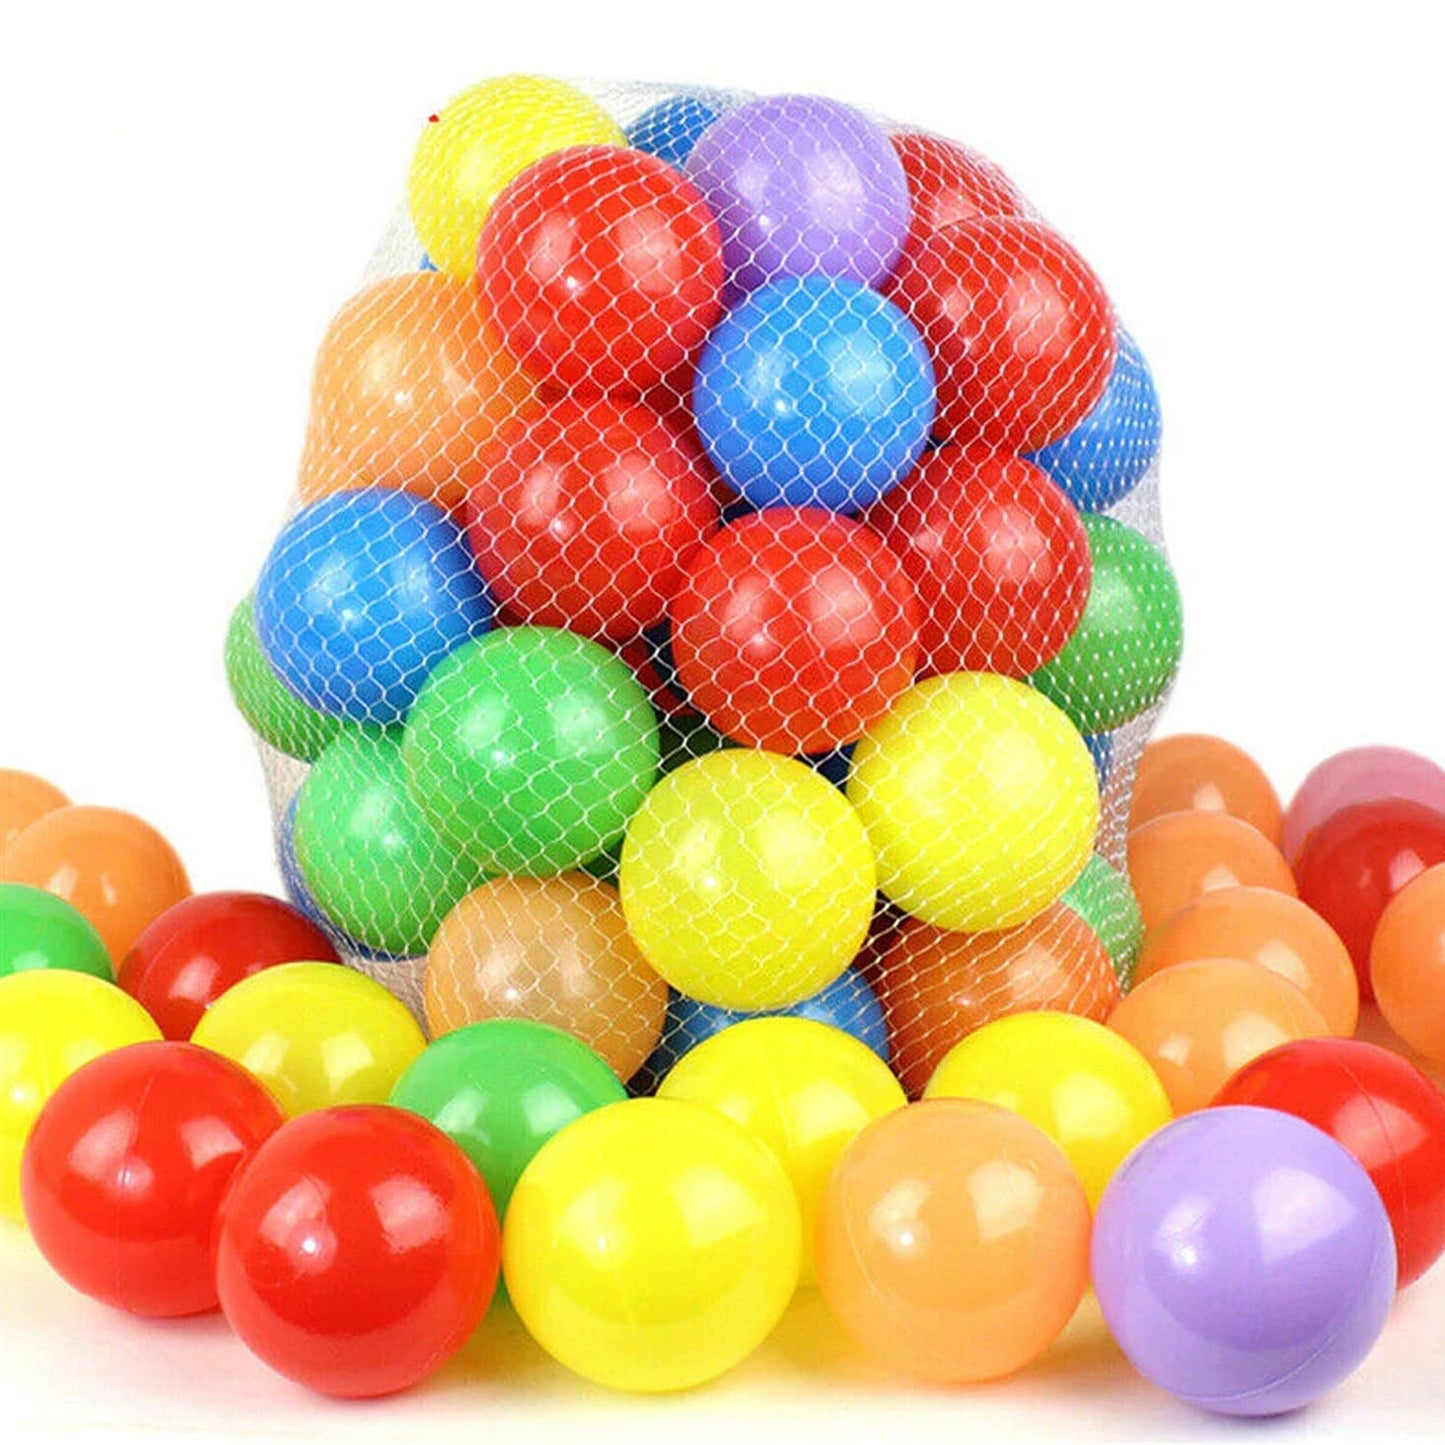 BAYBEE Soft Plastic Baby Pit Balls for Kids Reusable Soft Crush Proof Play Pit Balls Multicolour - (72 Pcs)